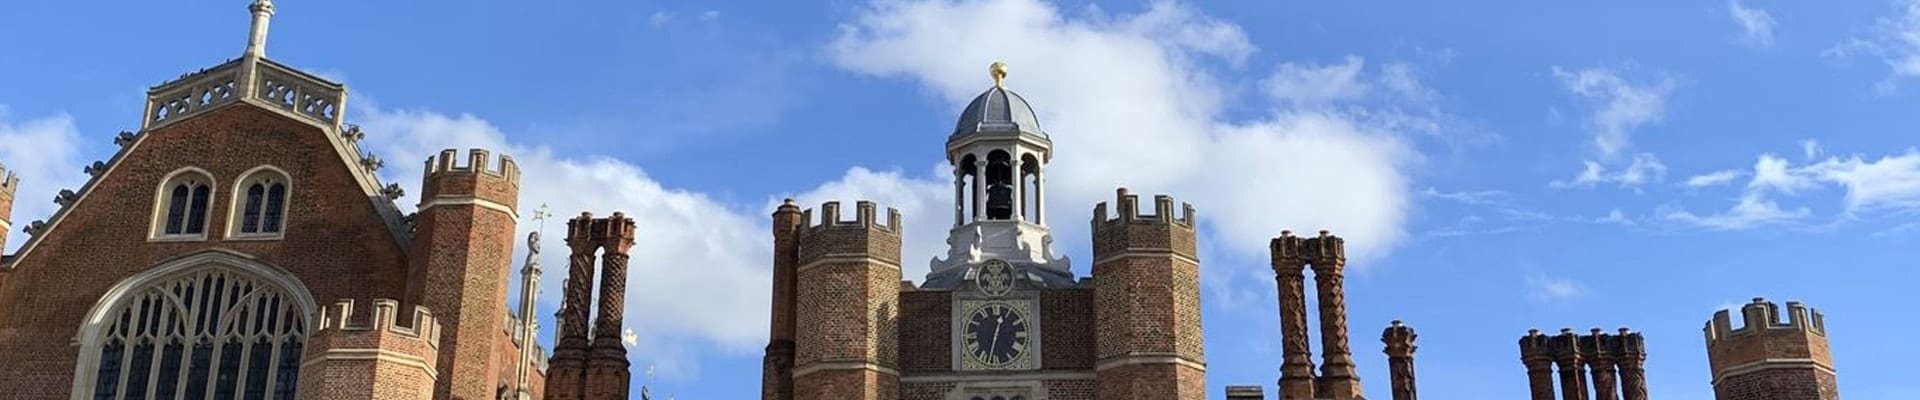 Hampton Court Palace, London, UK, 16th c., interior façade with a view of one of its clock towers; Nov 2018